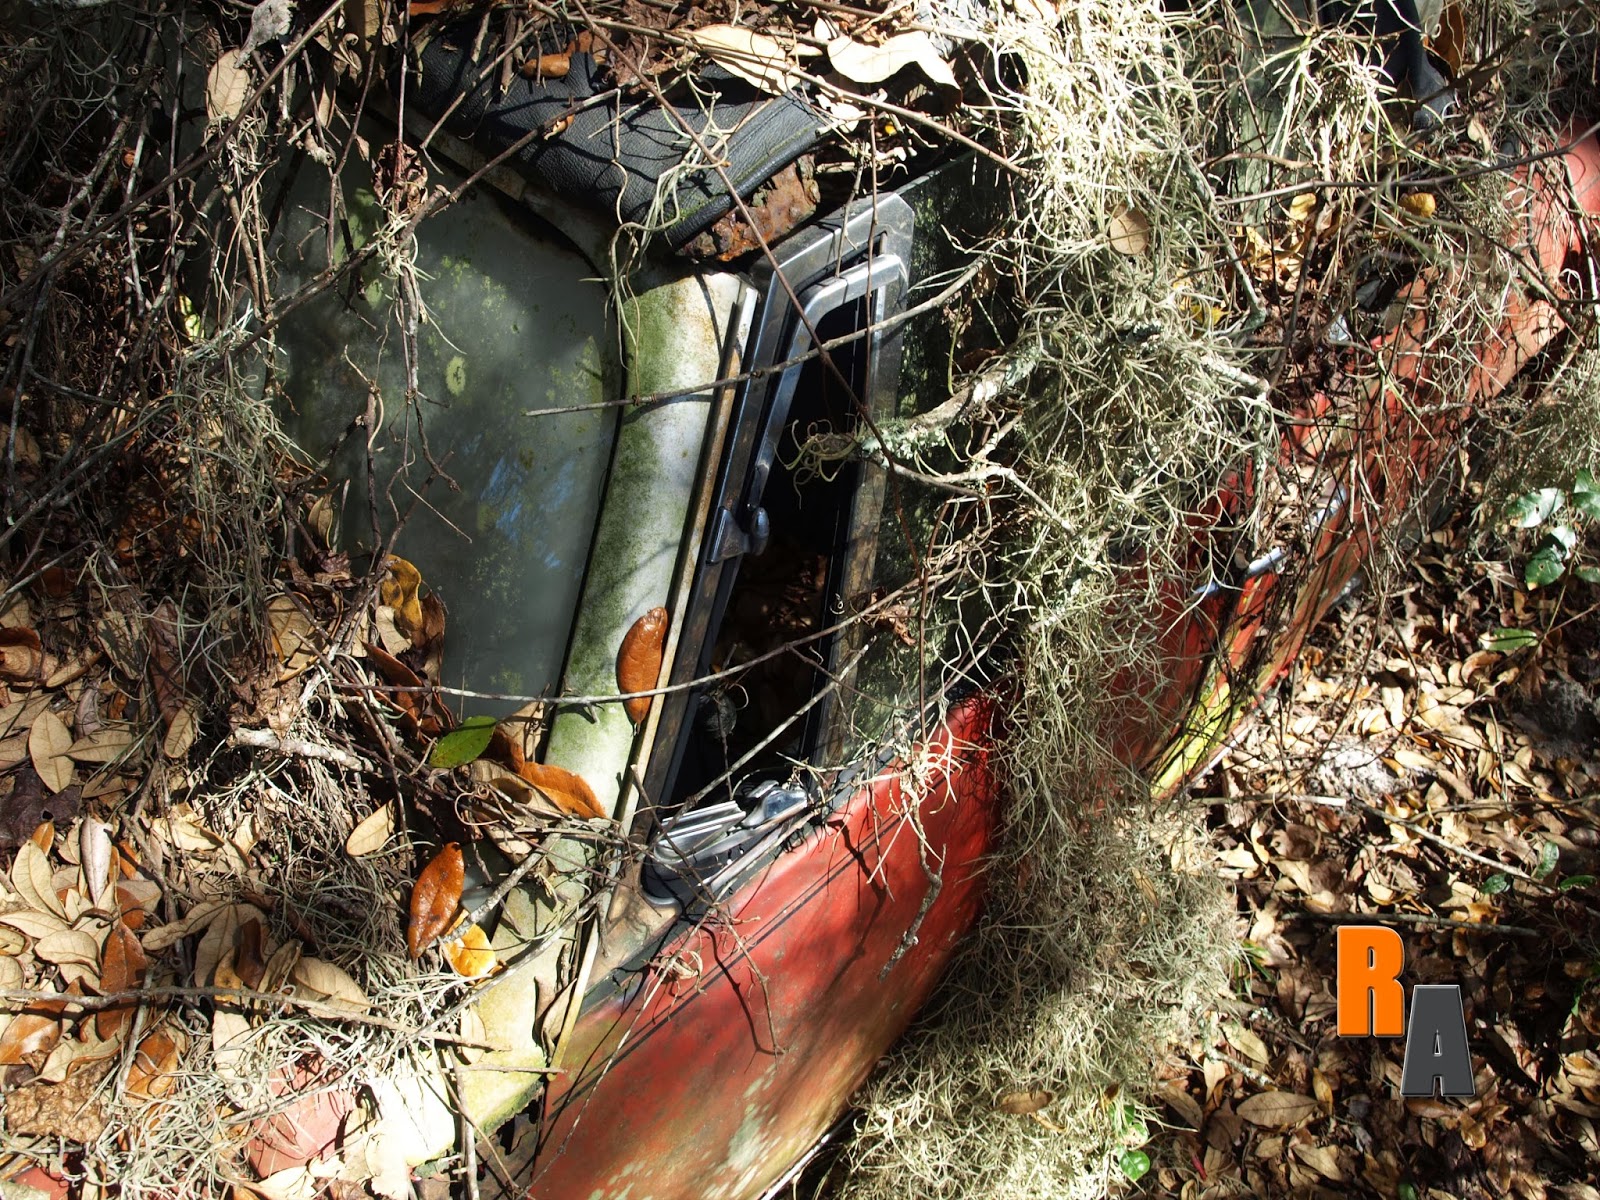 1960s mg midget mkii central florida gabel collection rotting in style